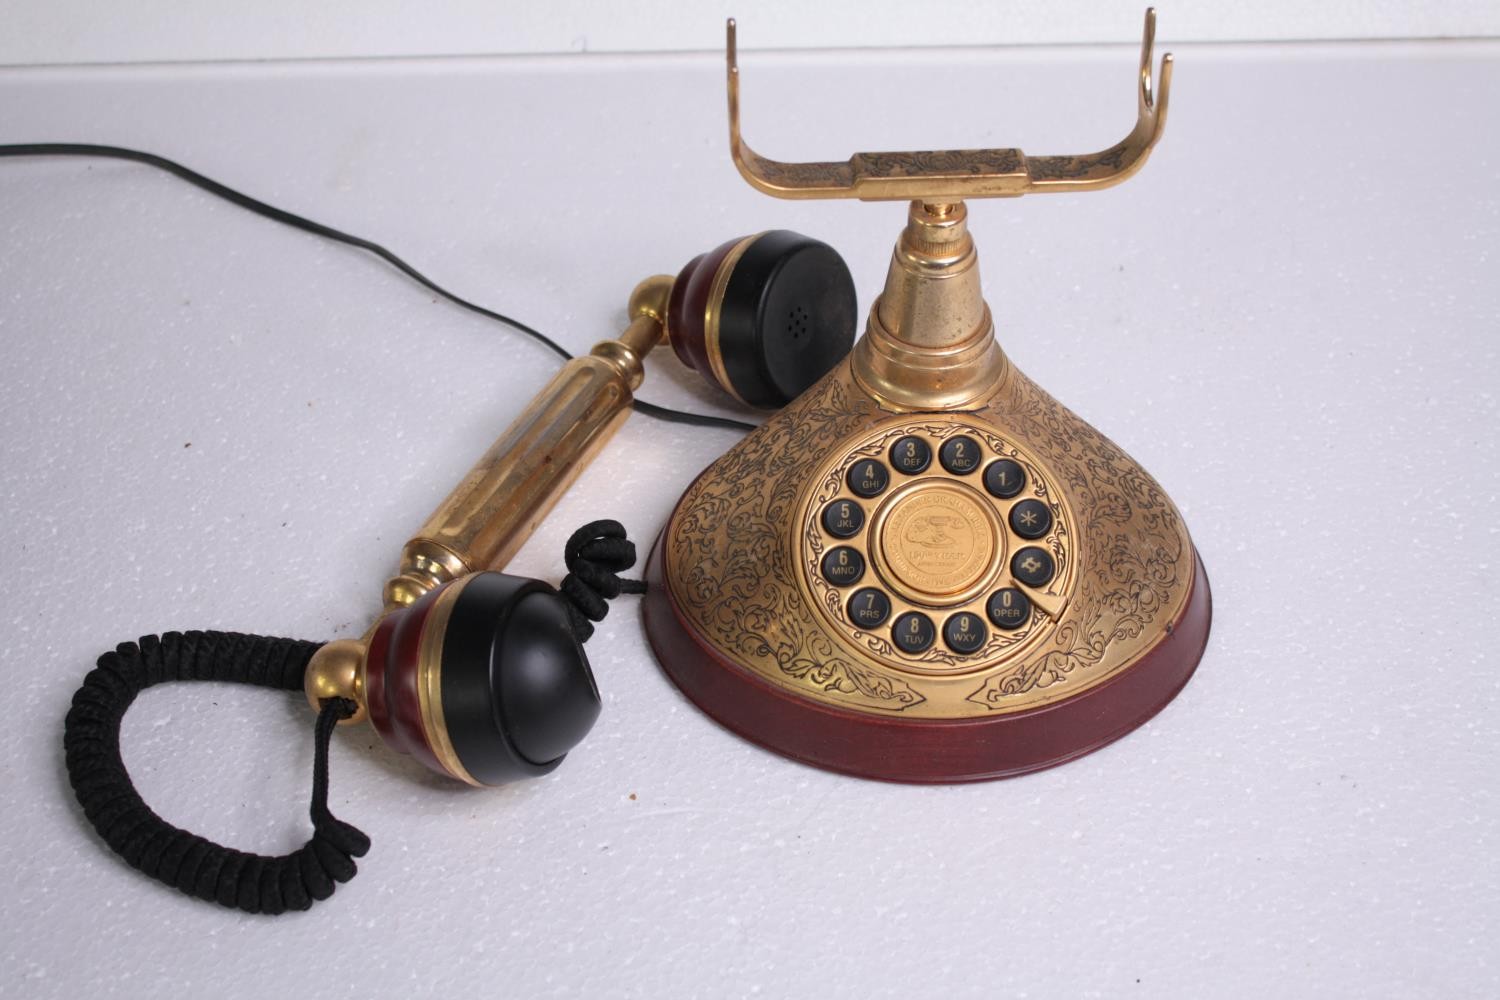 A modern reproduction of an old phone. H.18 W.25cm. - Image 3 of 4